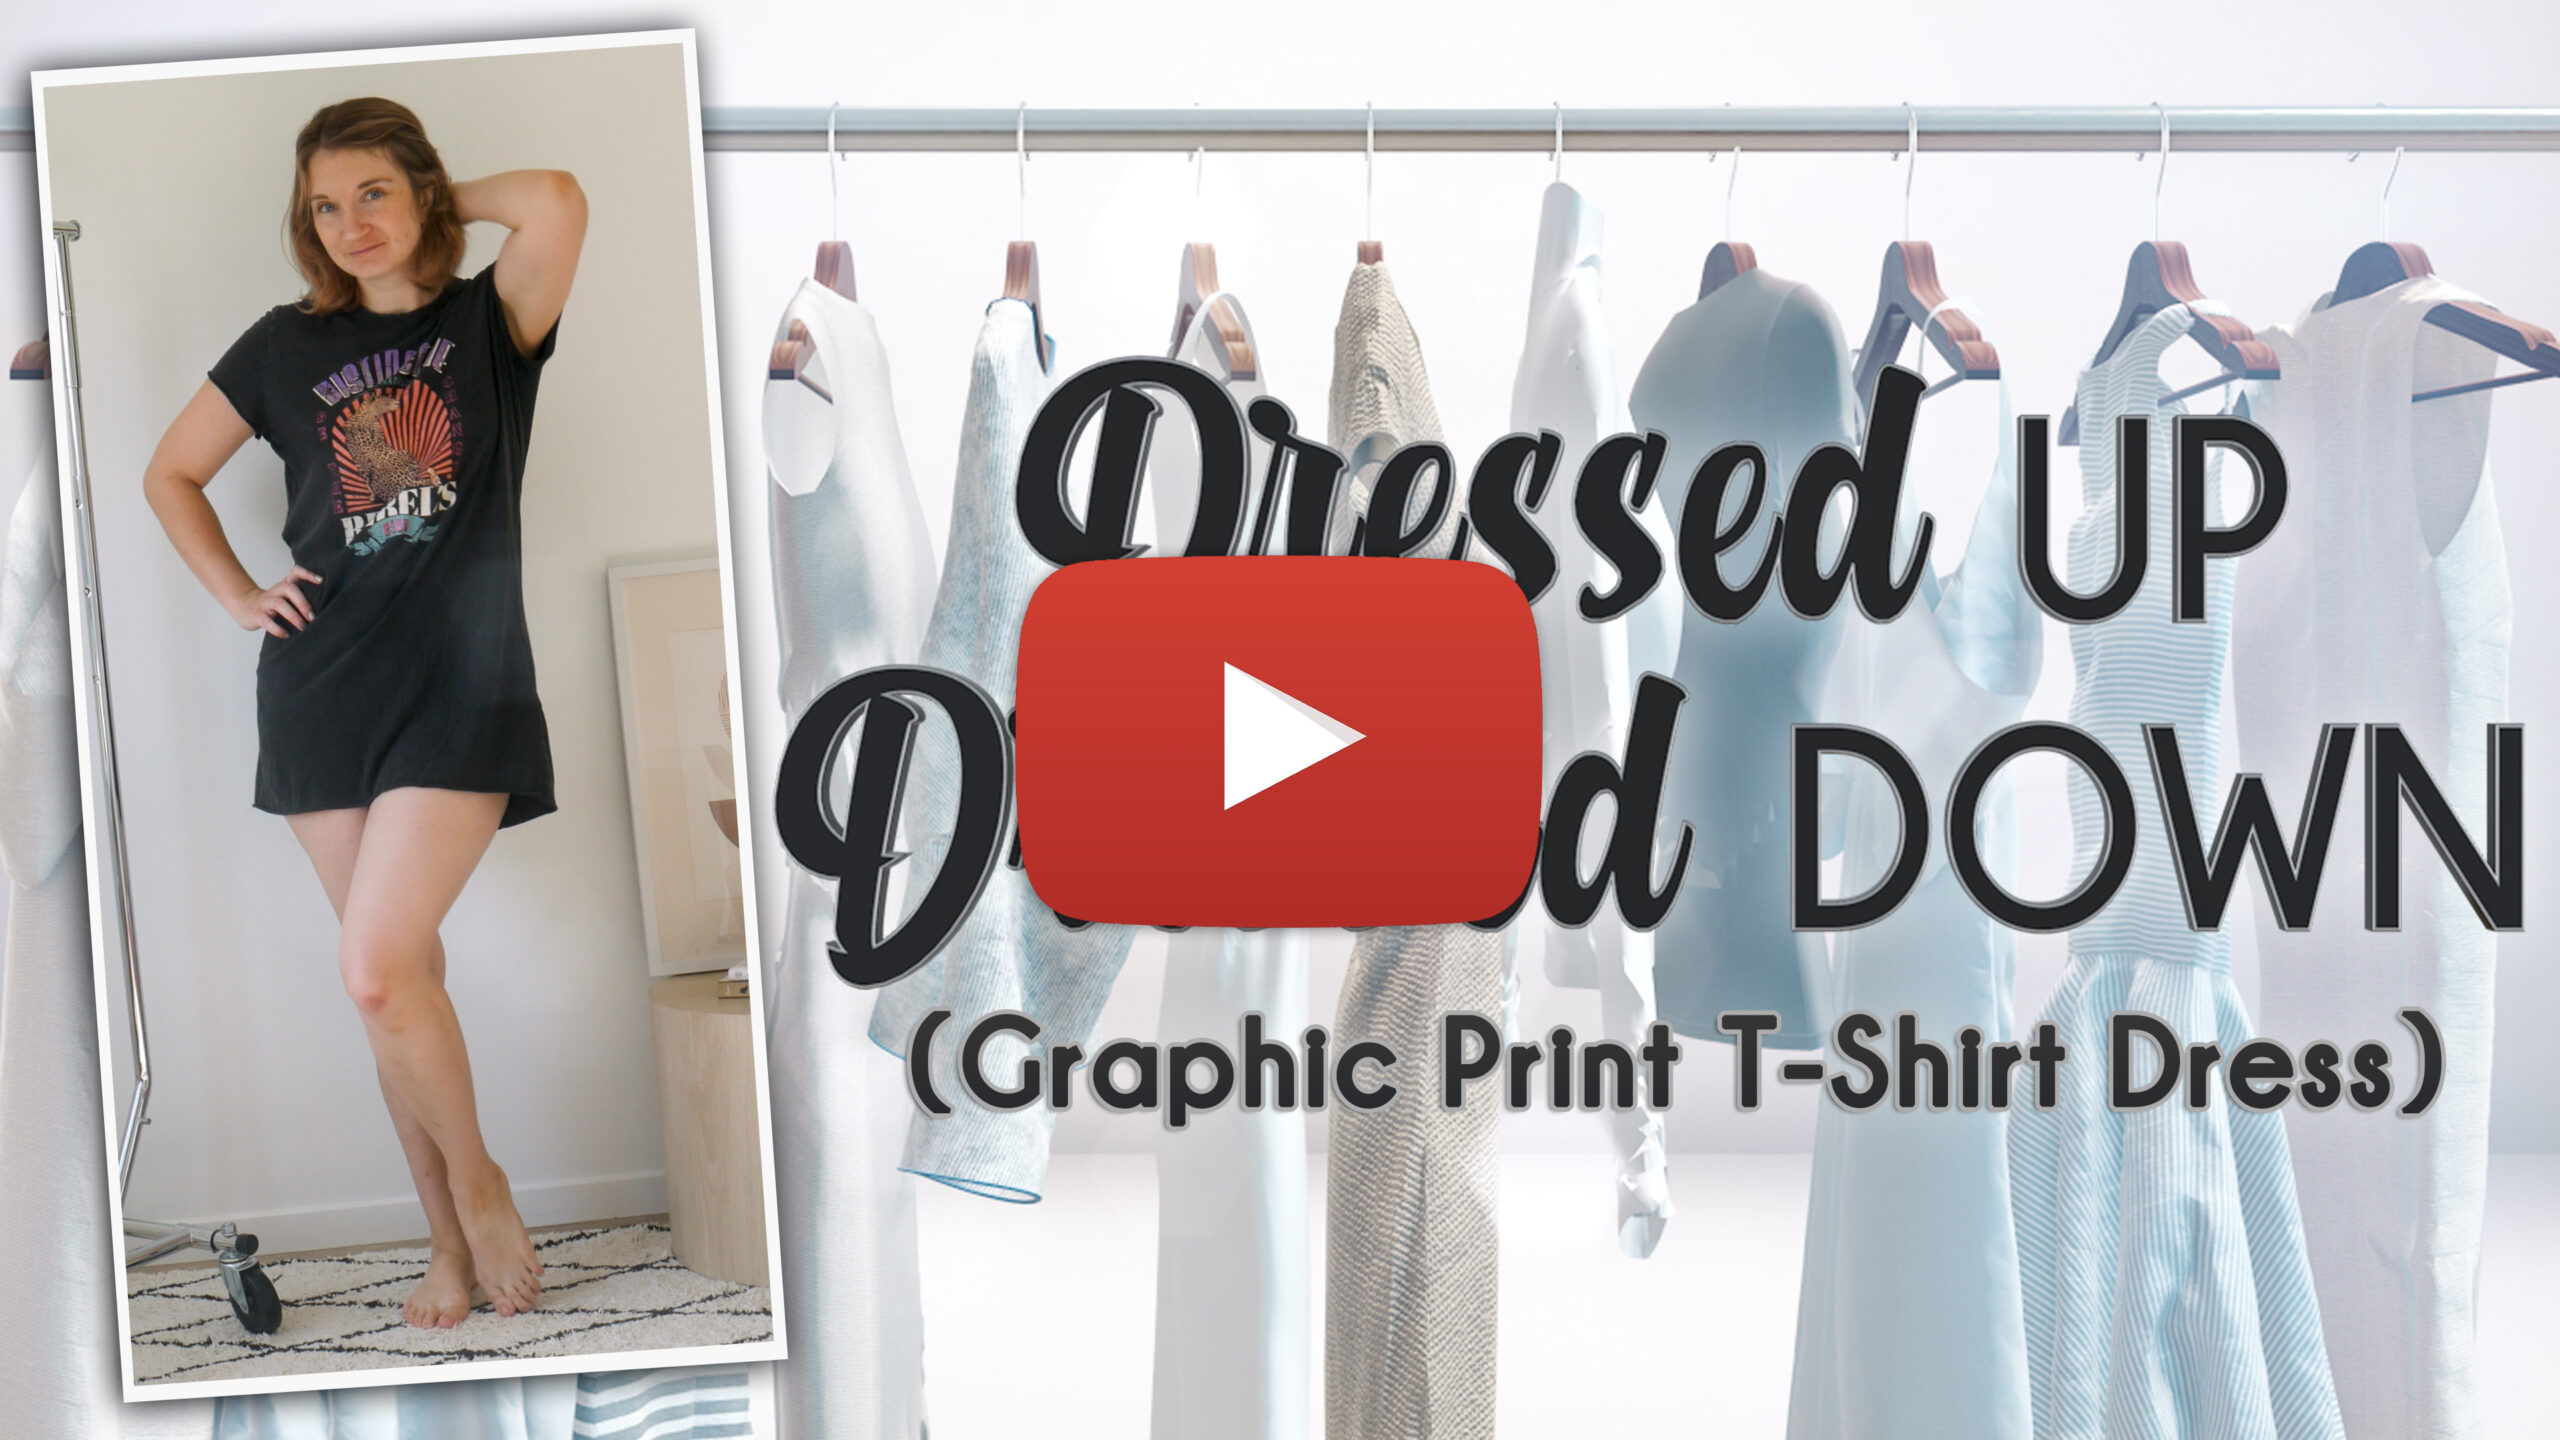 Dressed Up Dressed Down (Graphic Print T-Shirt Dress) Youtube Thumbnail Play Button